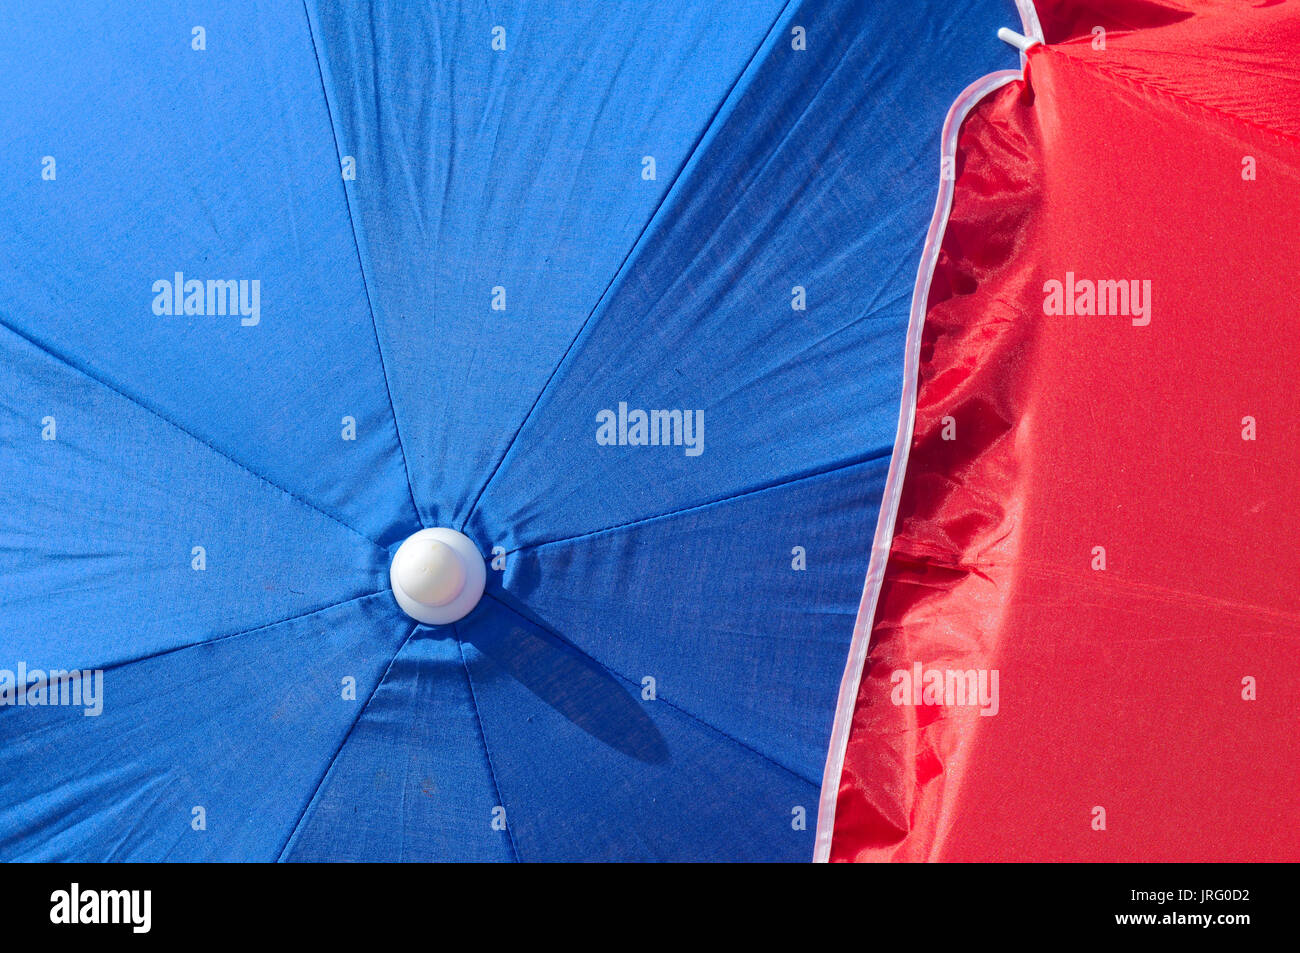 Blue and red Beach umbrella. Summertime and vacations theme Stock Photo